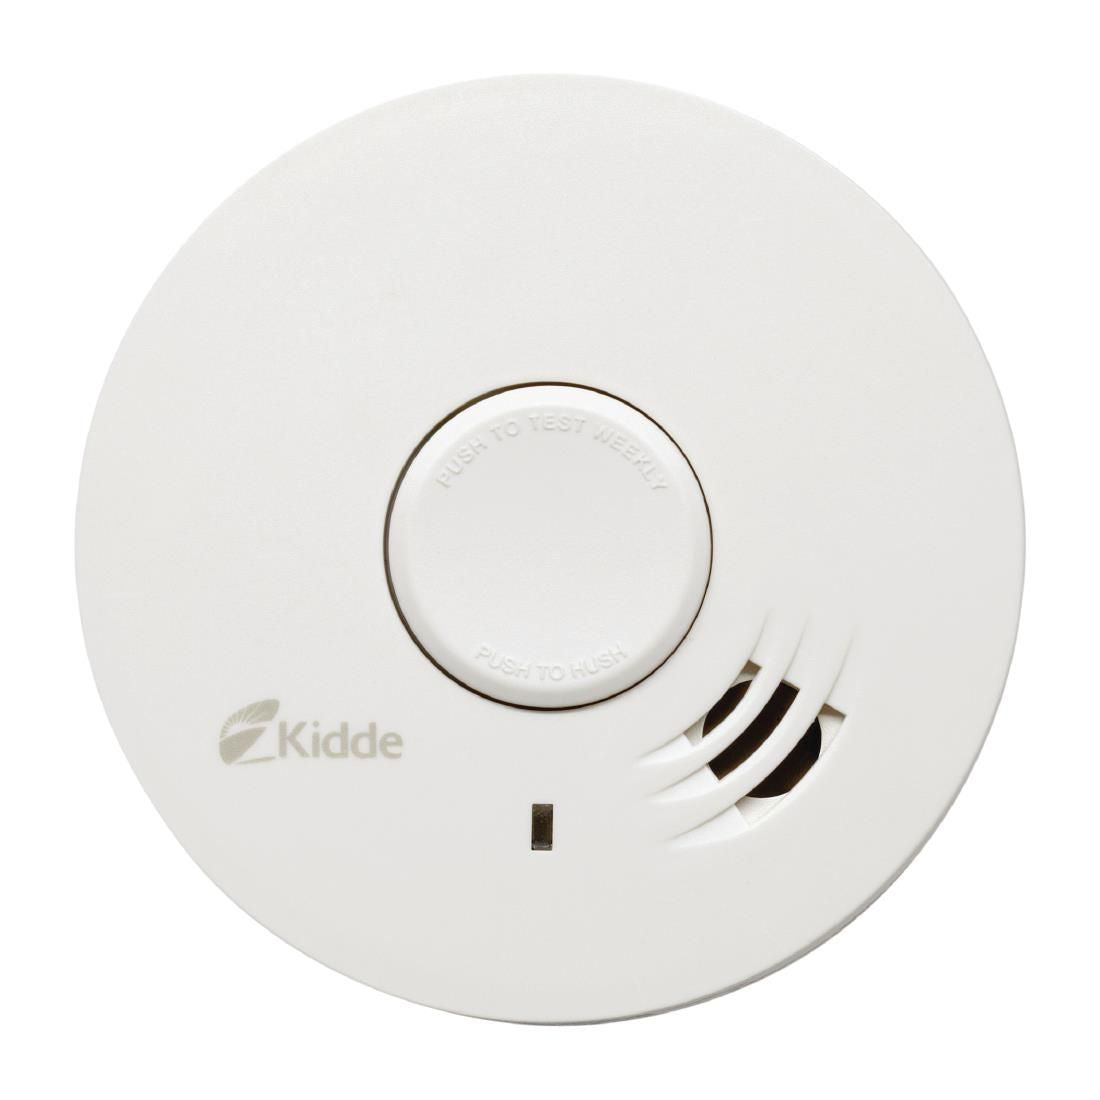 Kidde Optical Smoke Alarm With 10 Year Battery JD Catering Equipment Solutions Ltd